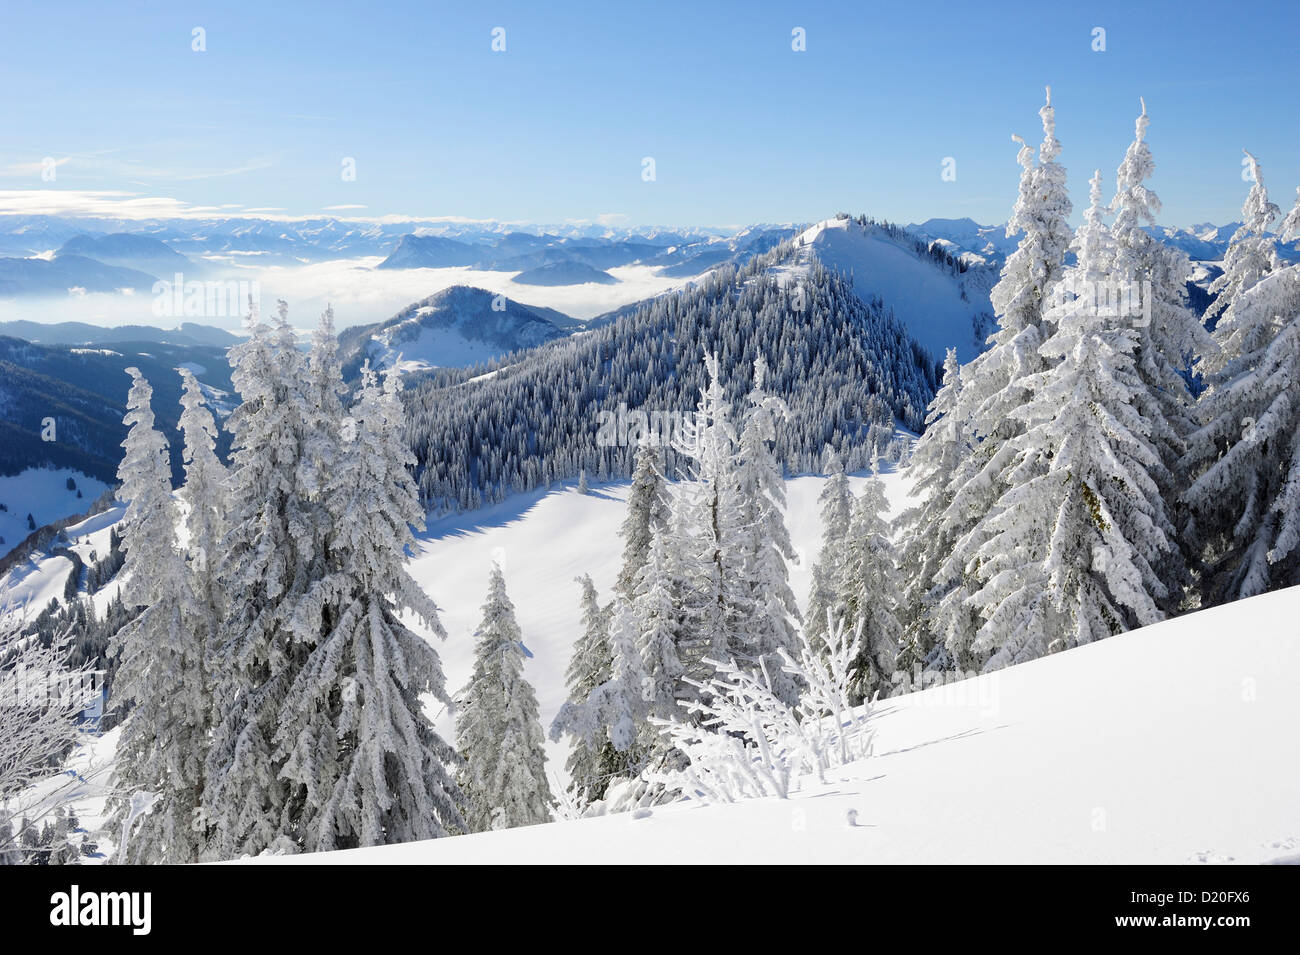 Snow-covered fir trees with view down to the Inn valley, Hochries, Chiemgau range, Chiemgau, Upper Bavaria, Bavaria, Germany Stock Photo